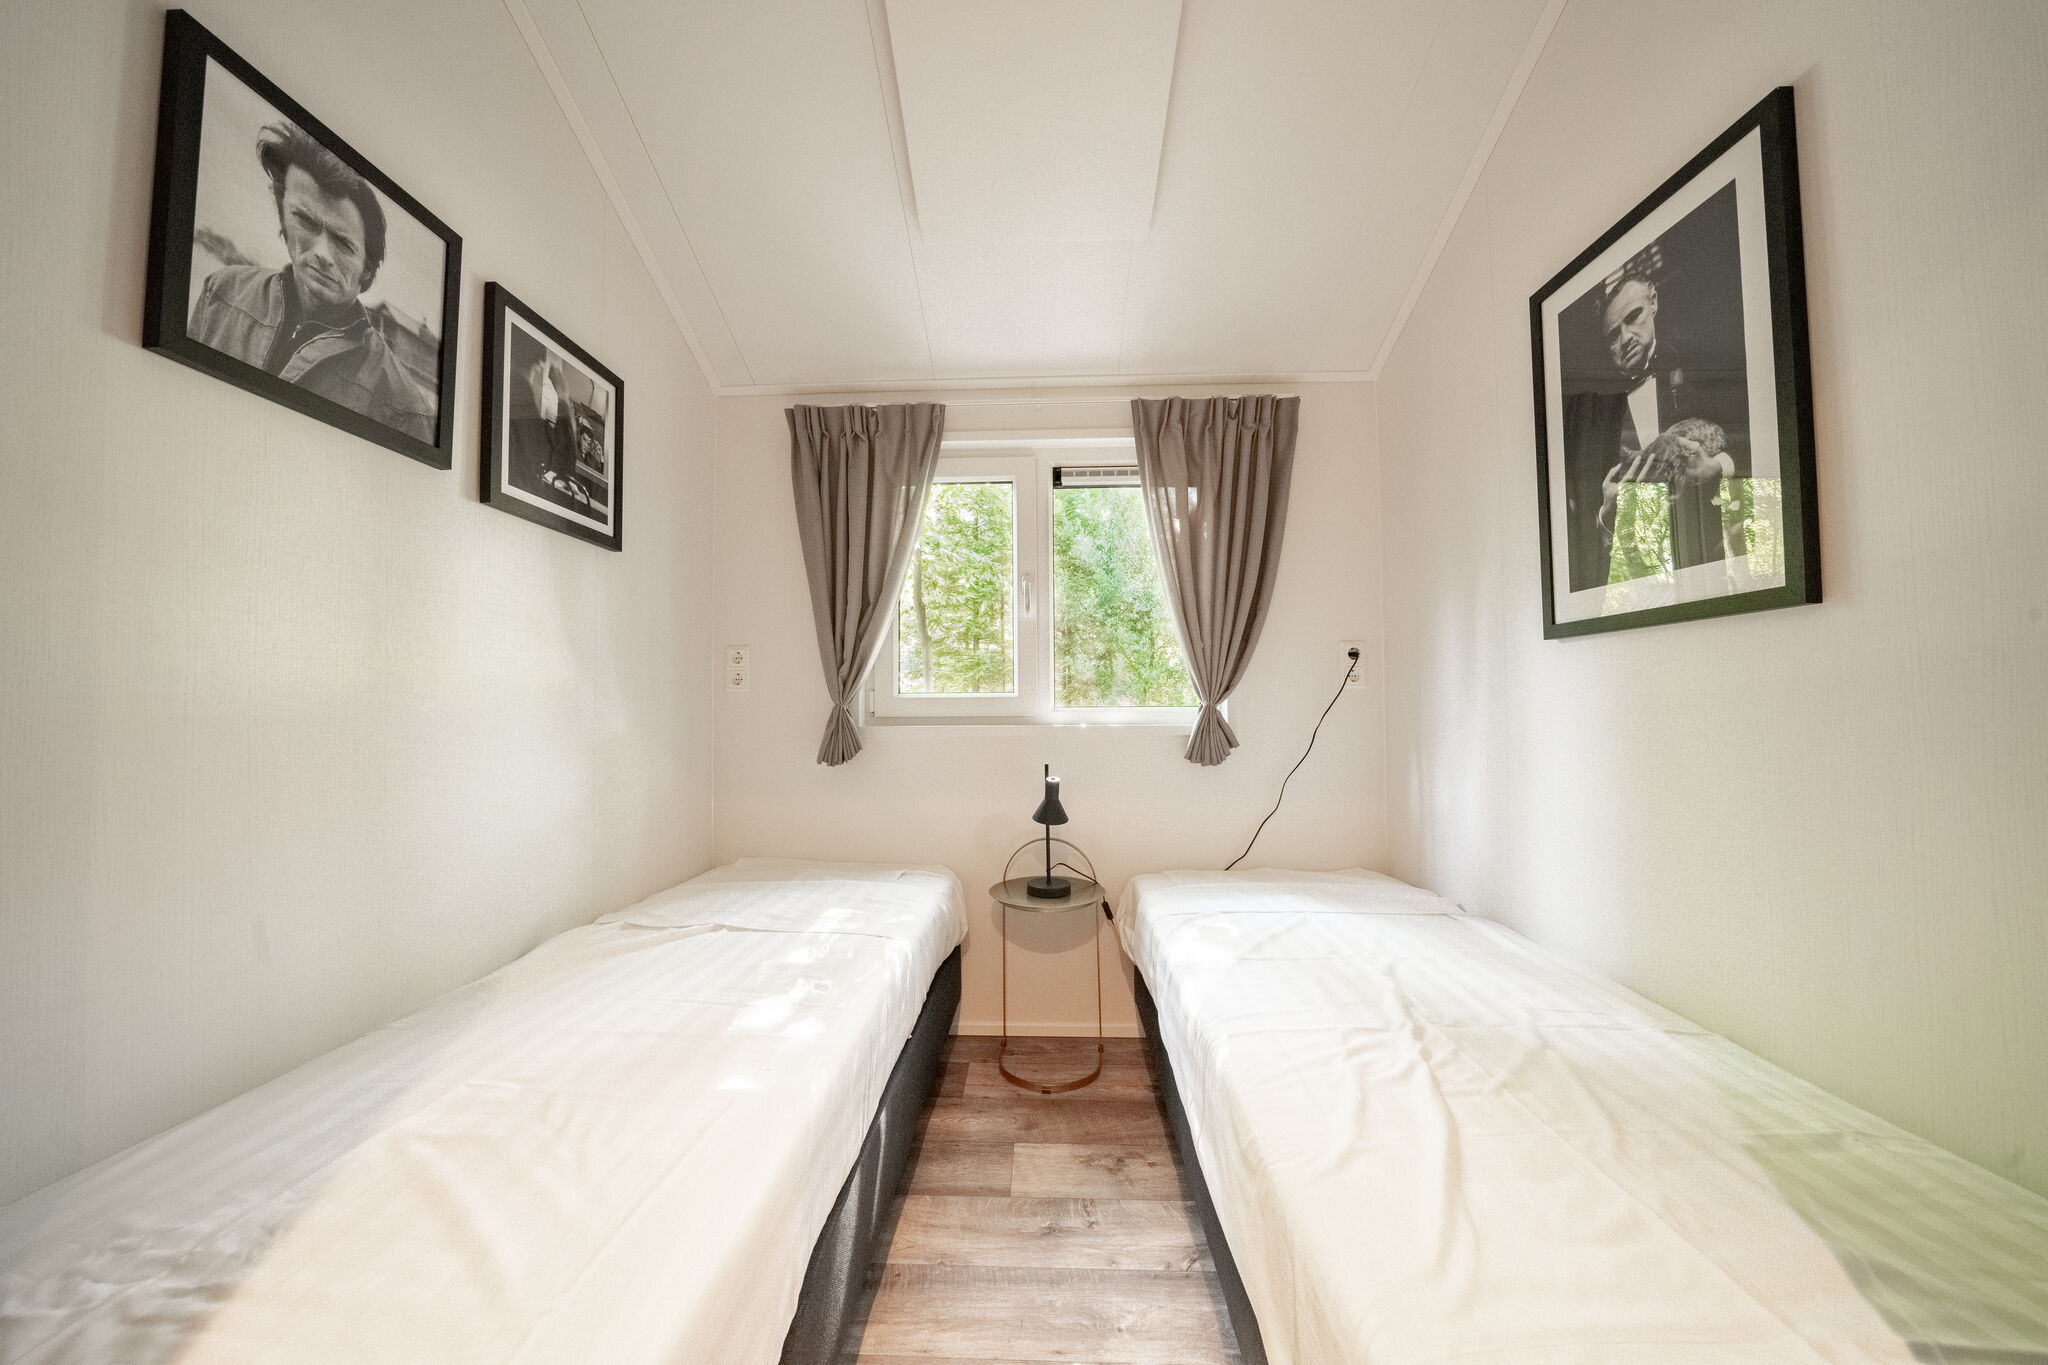 Nice chalet in beautiful location, Utrecht at 20km